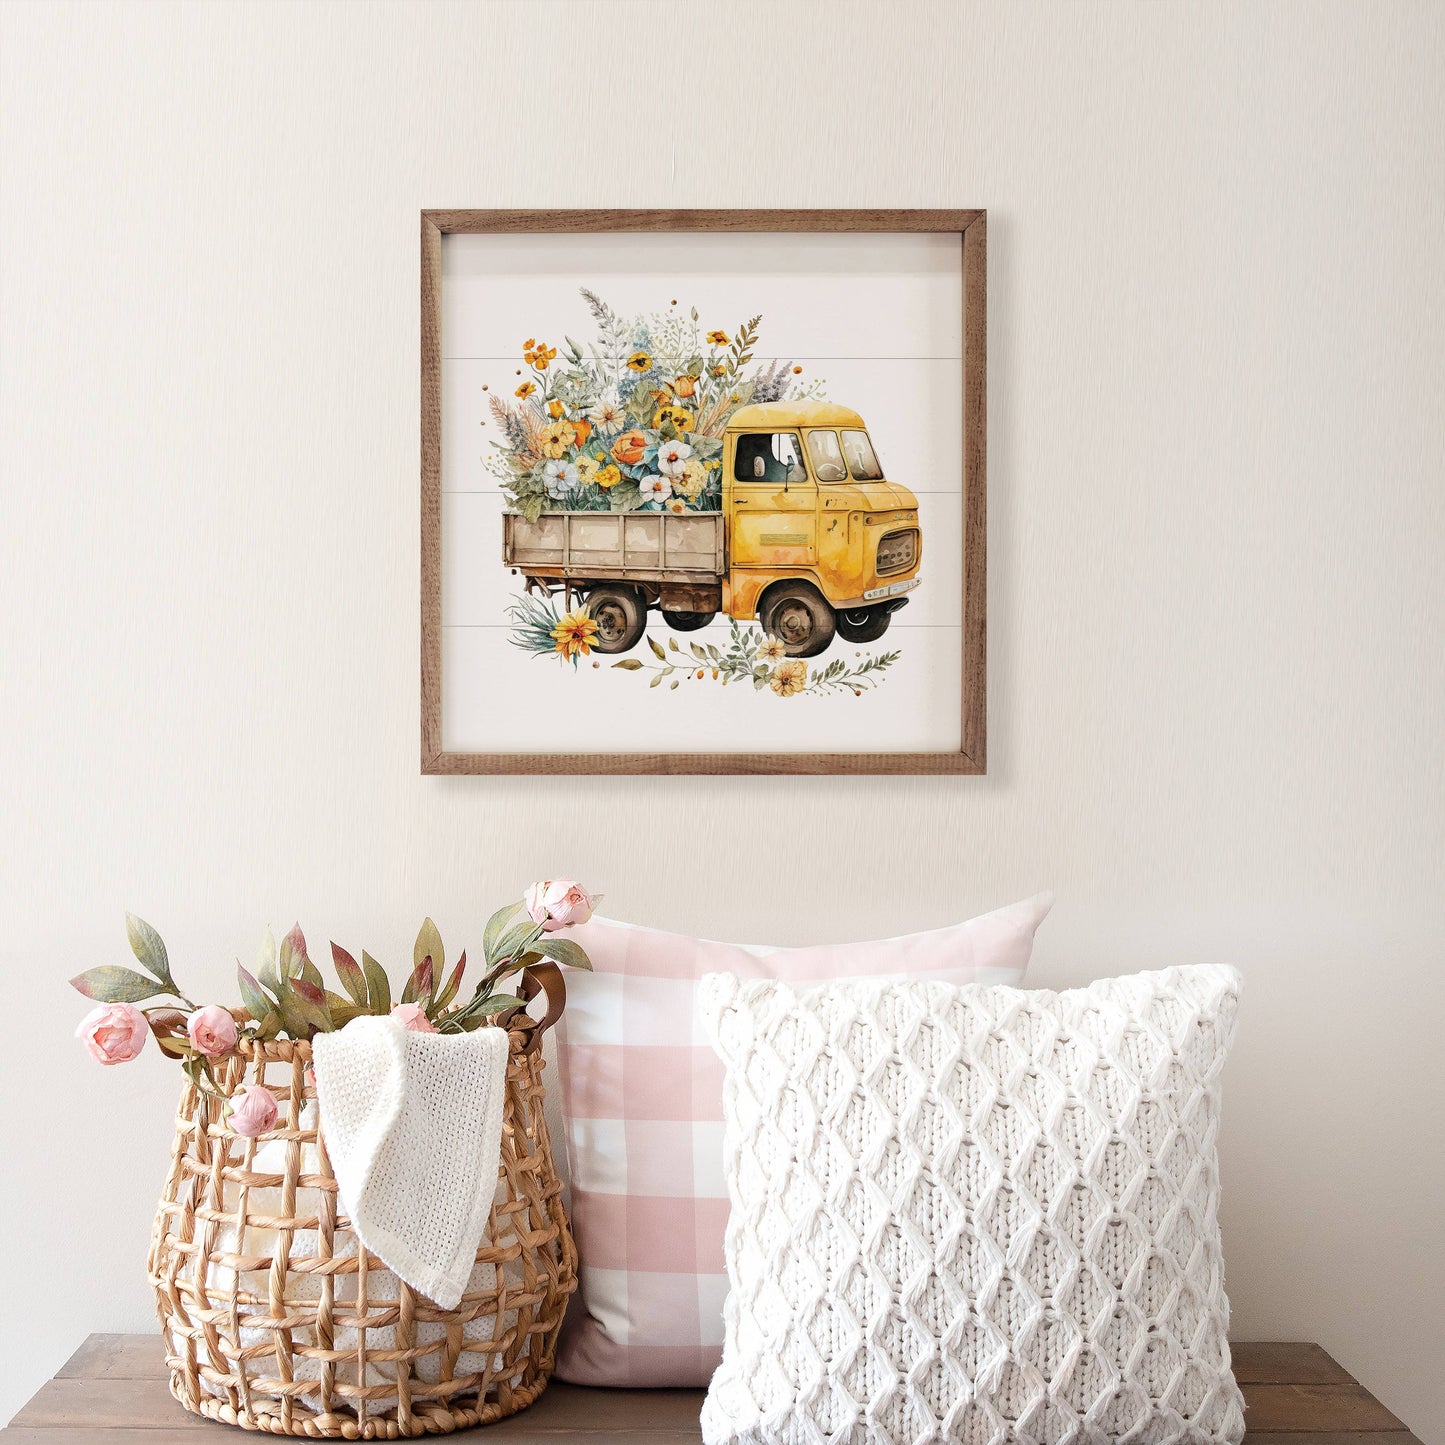 8x8 Home Decor: Yellow Truck With Flowers